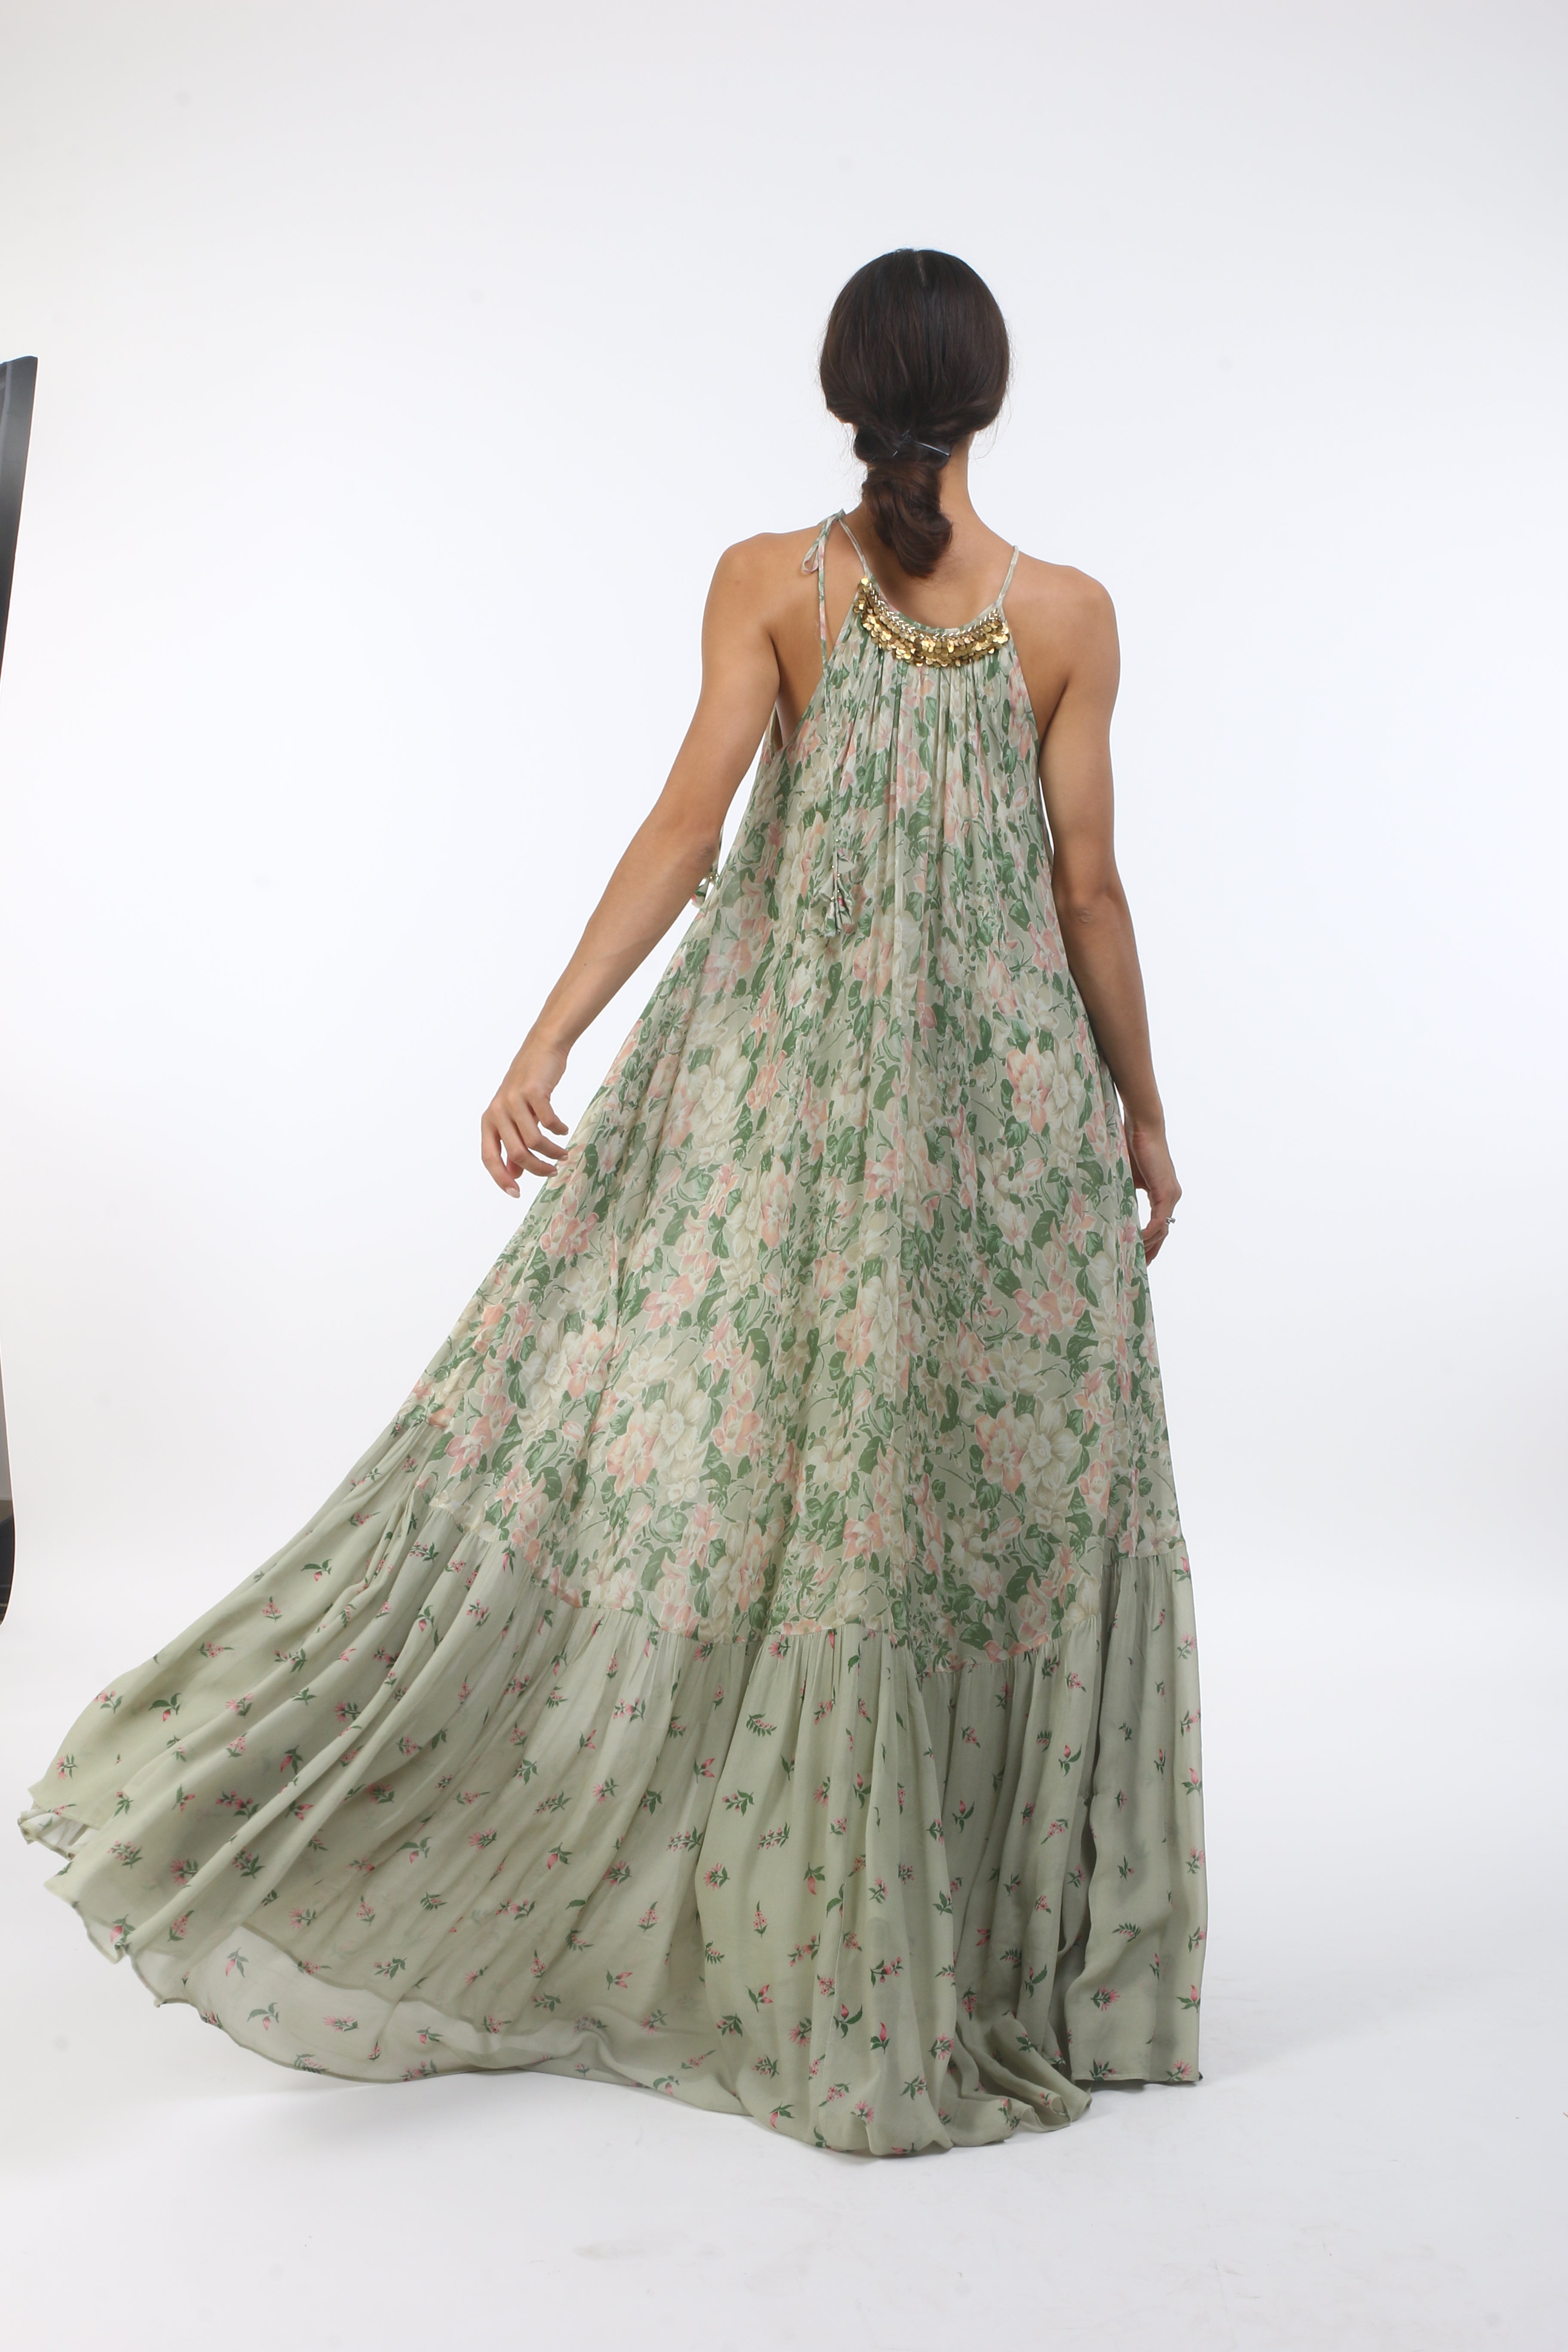 Bloom antique jade bibi jaal printed halter dress in georgette, with gathers and layered coin embroidered neckline.